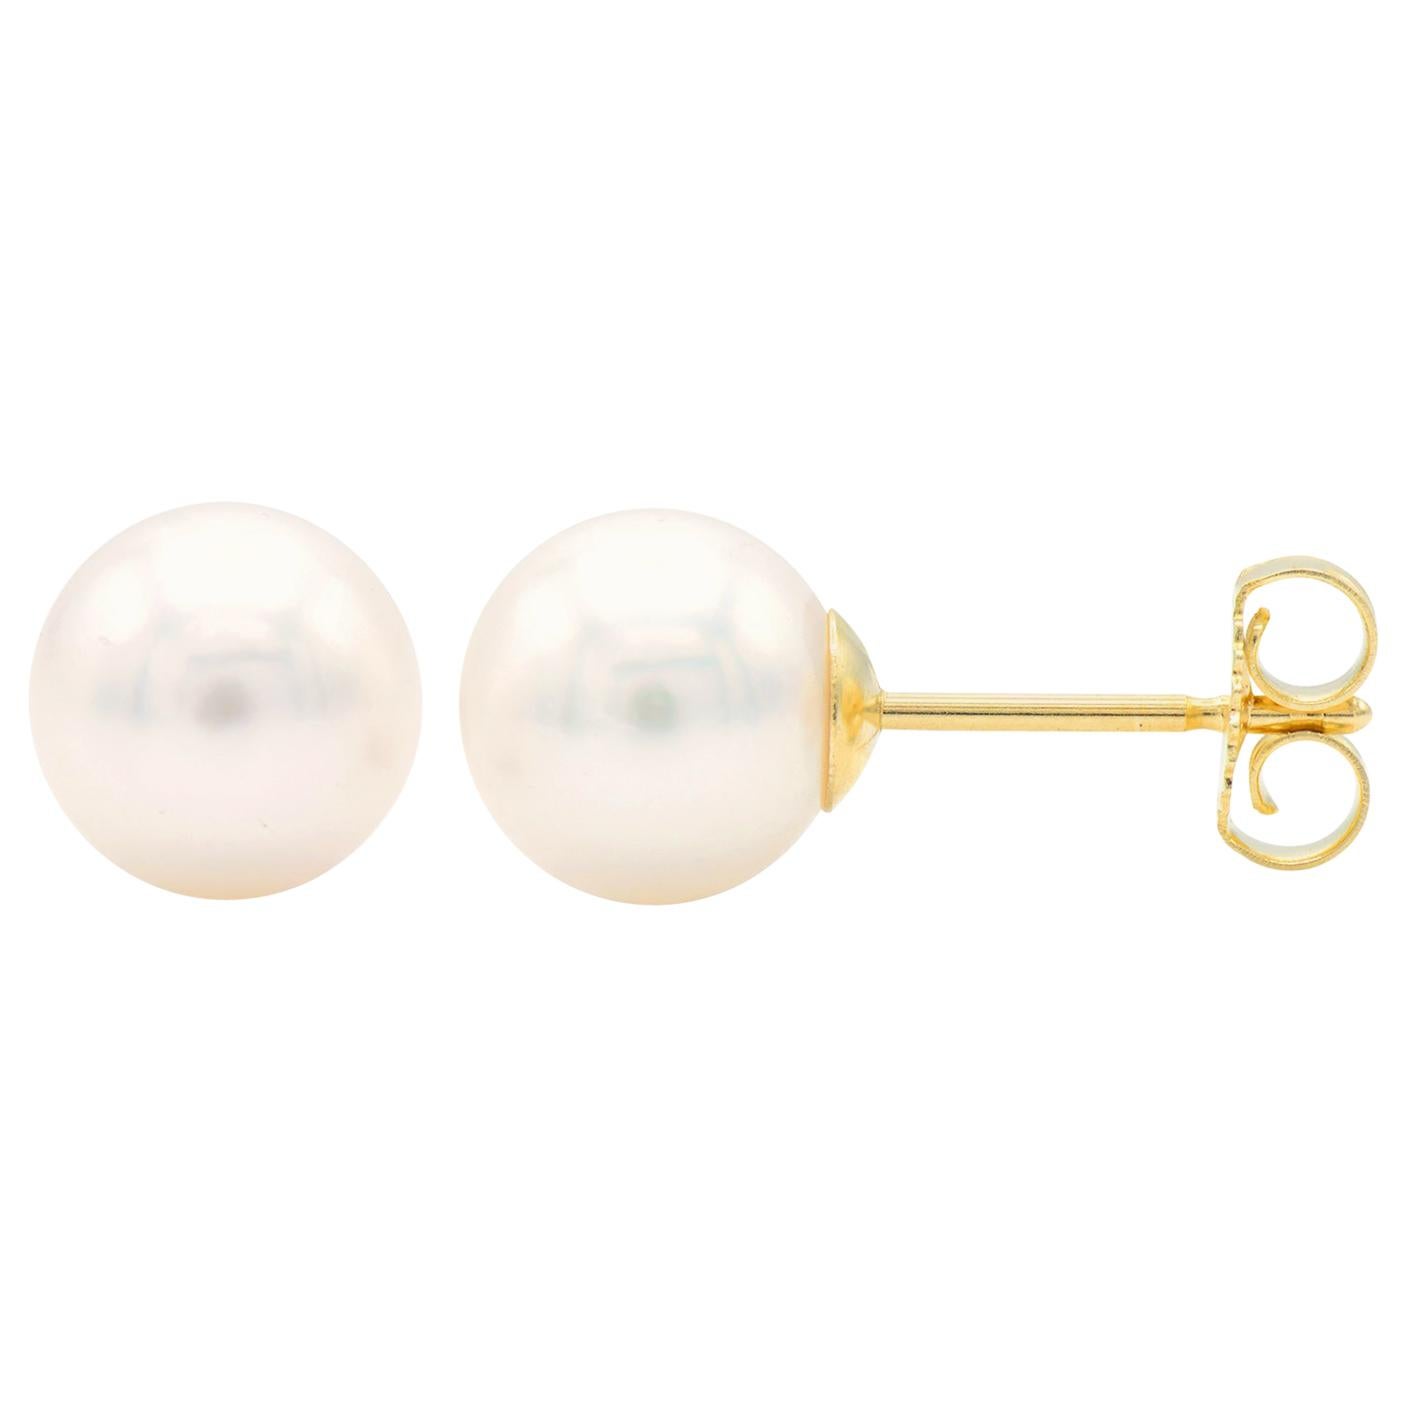 Cultured Pearl Stud Earrings with 14 Karat Yellow Gold Posts and Backs